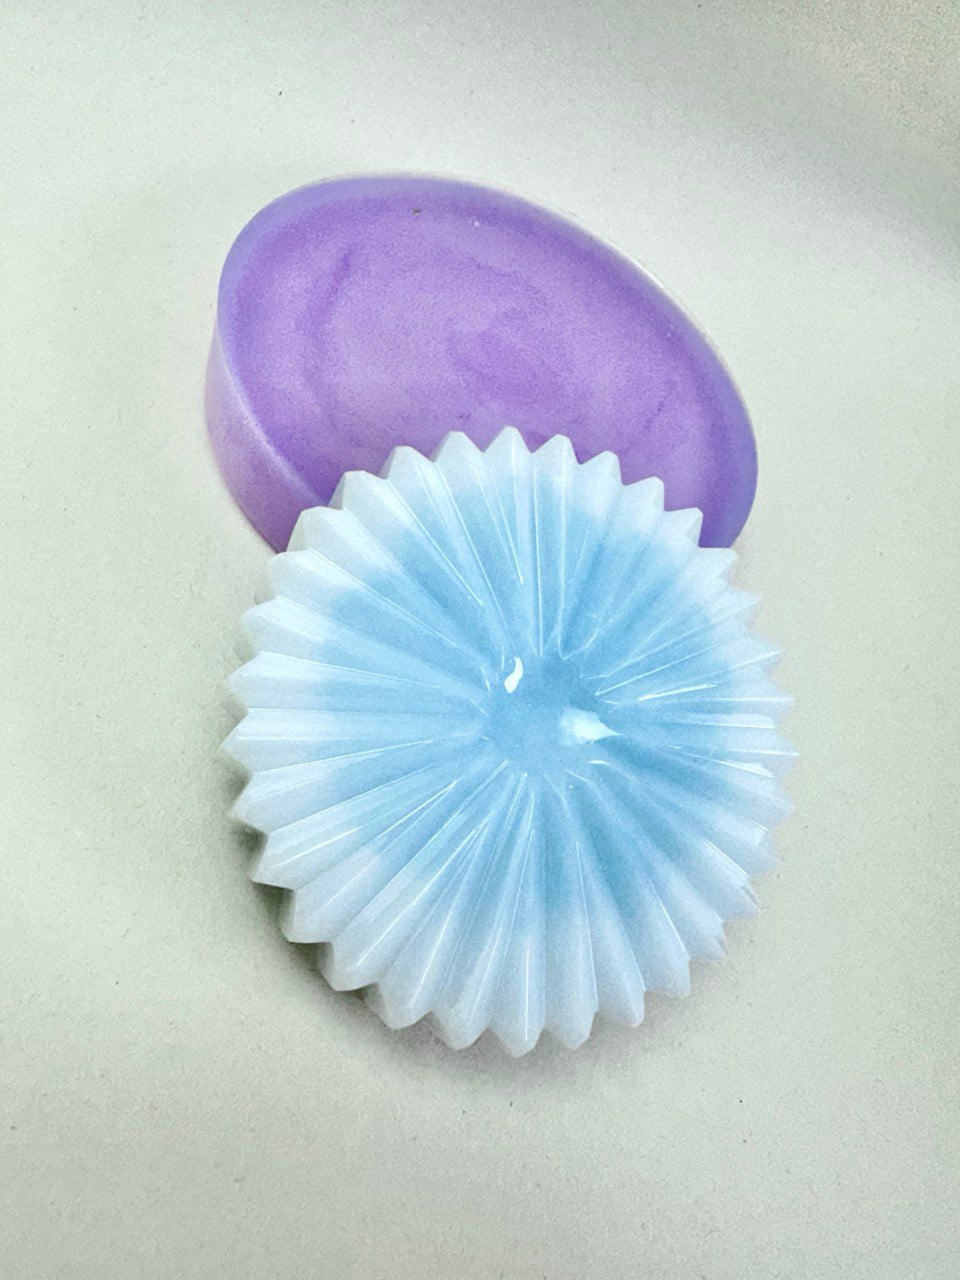 Silicone Mold for Stand Holder with Elegant Flower Design